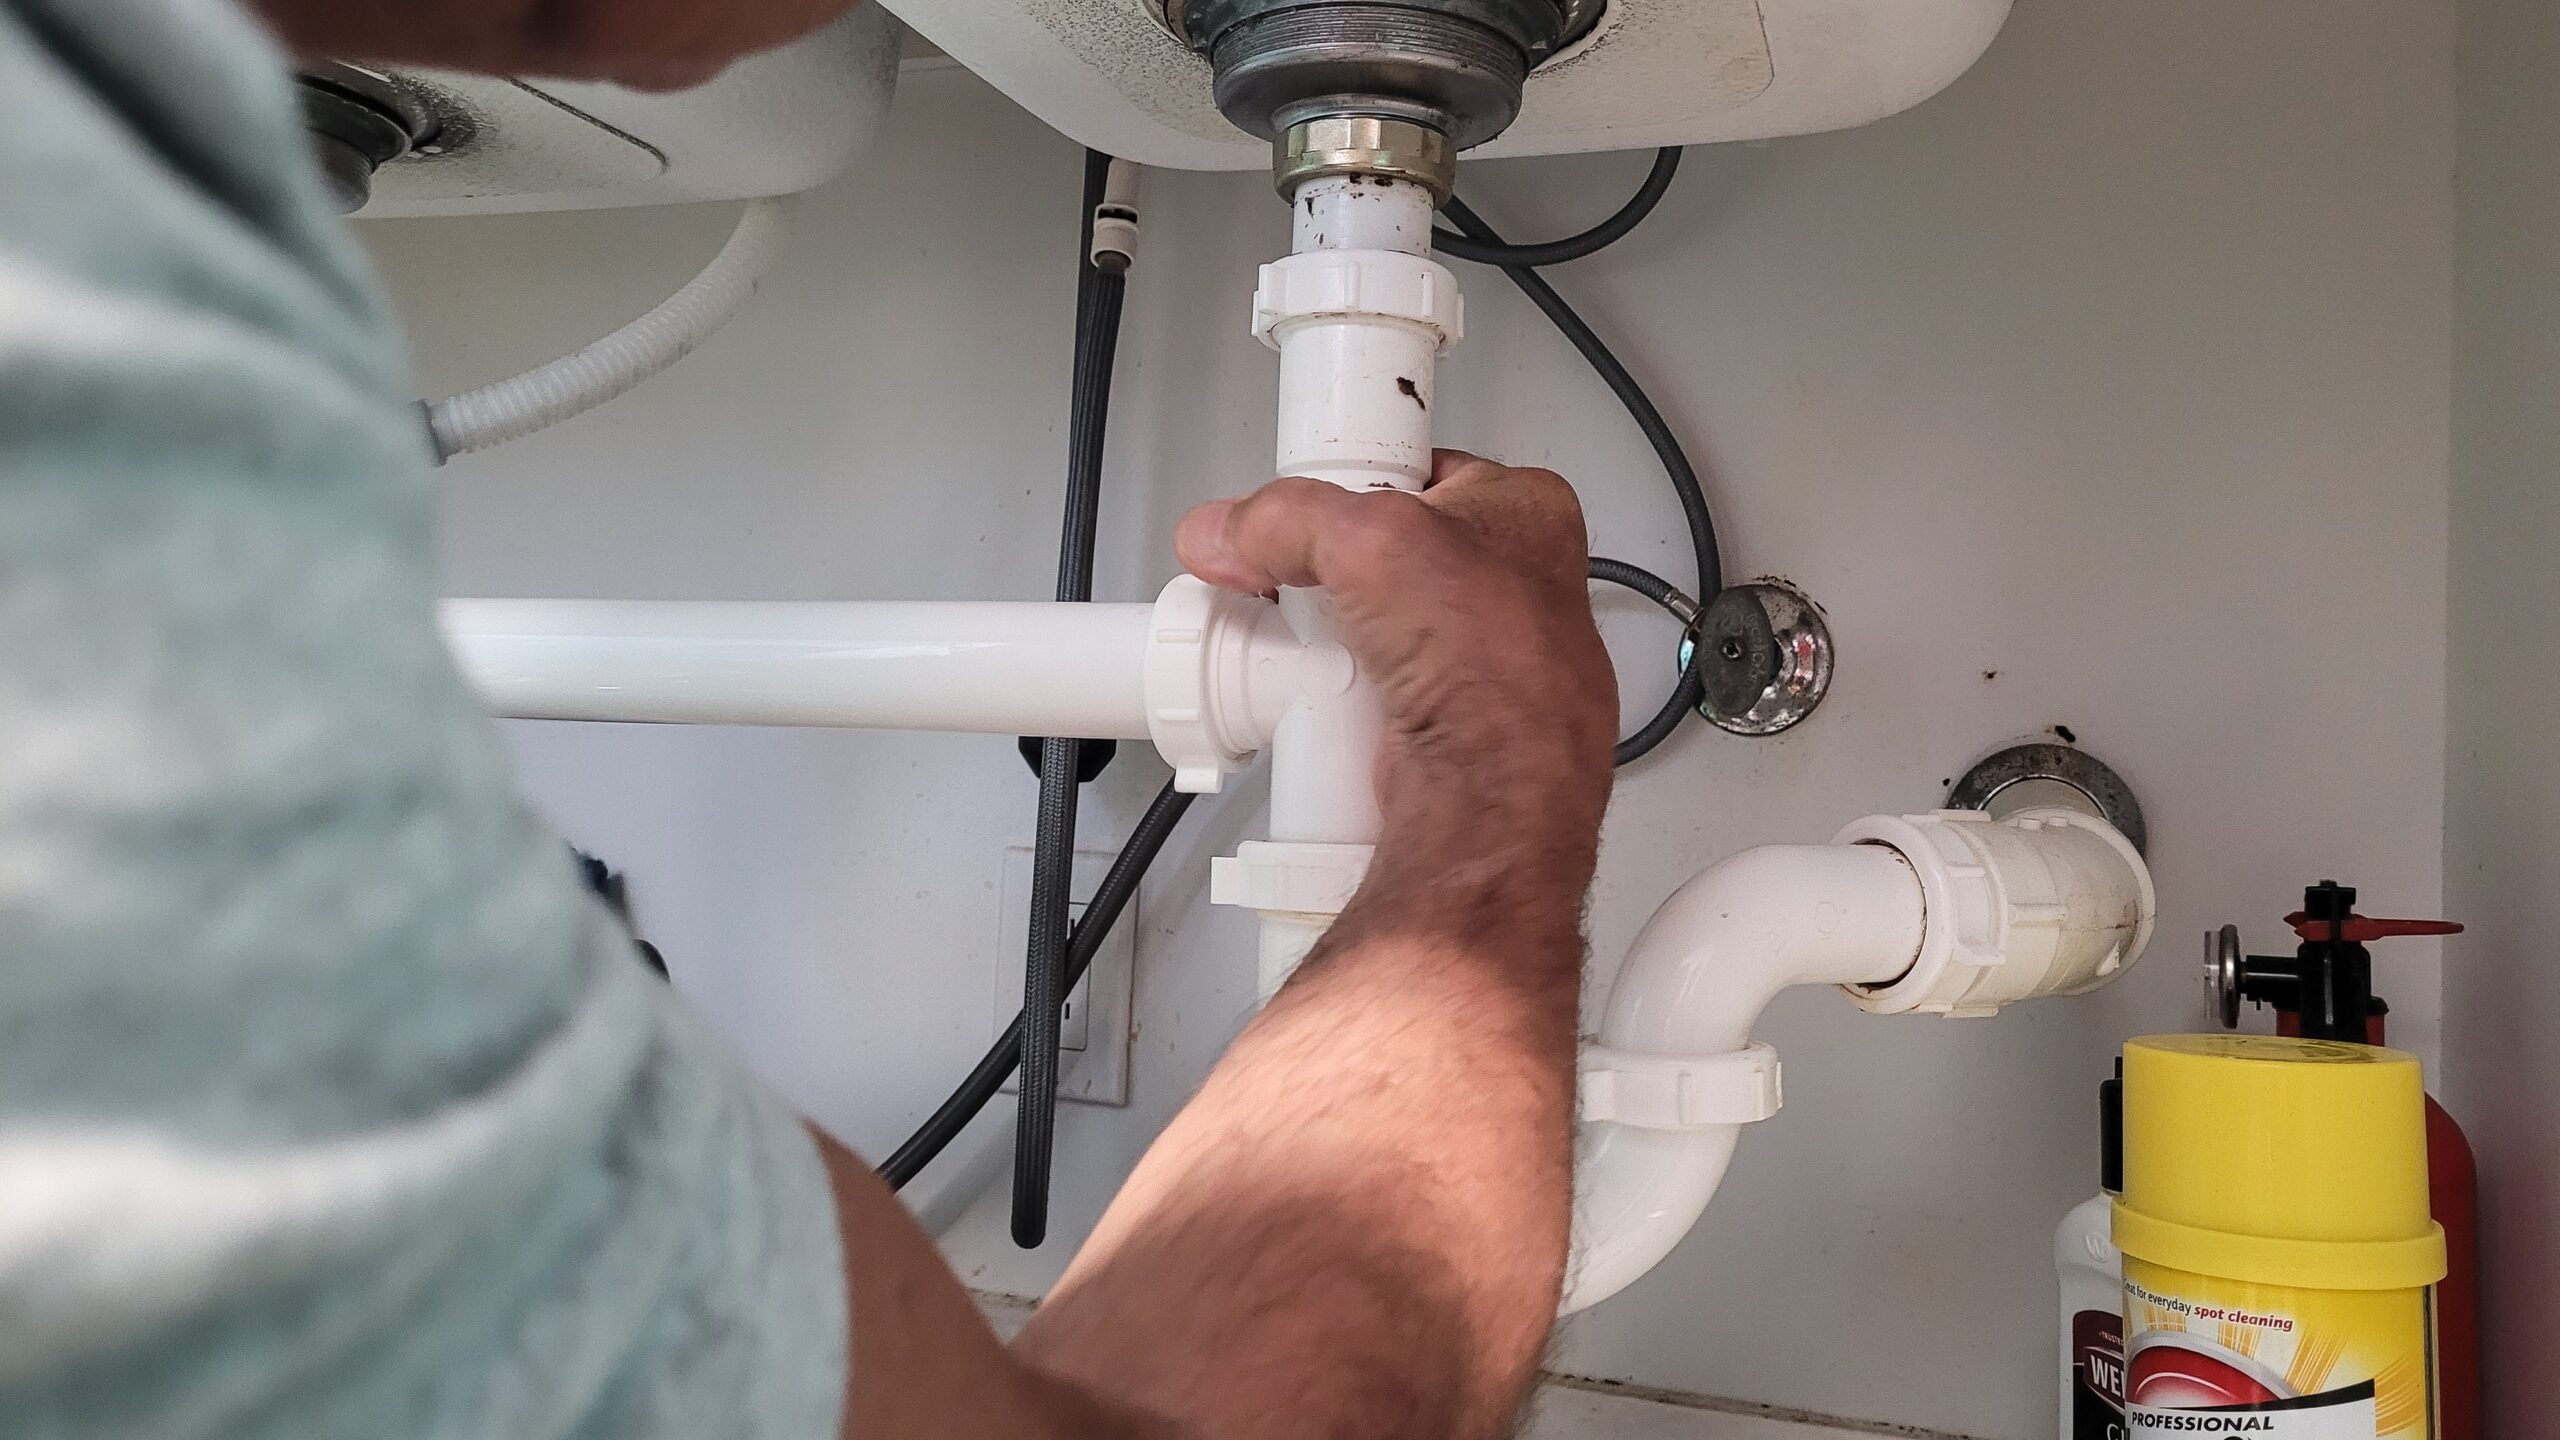 Professional plumber installing new plumbing system with precision.